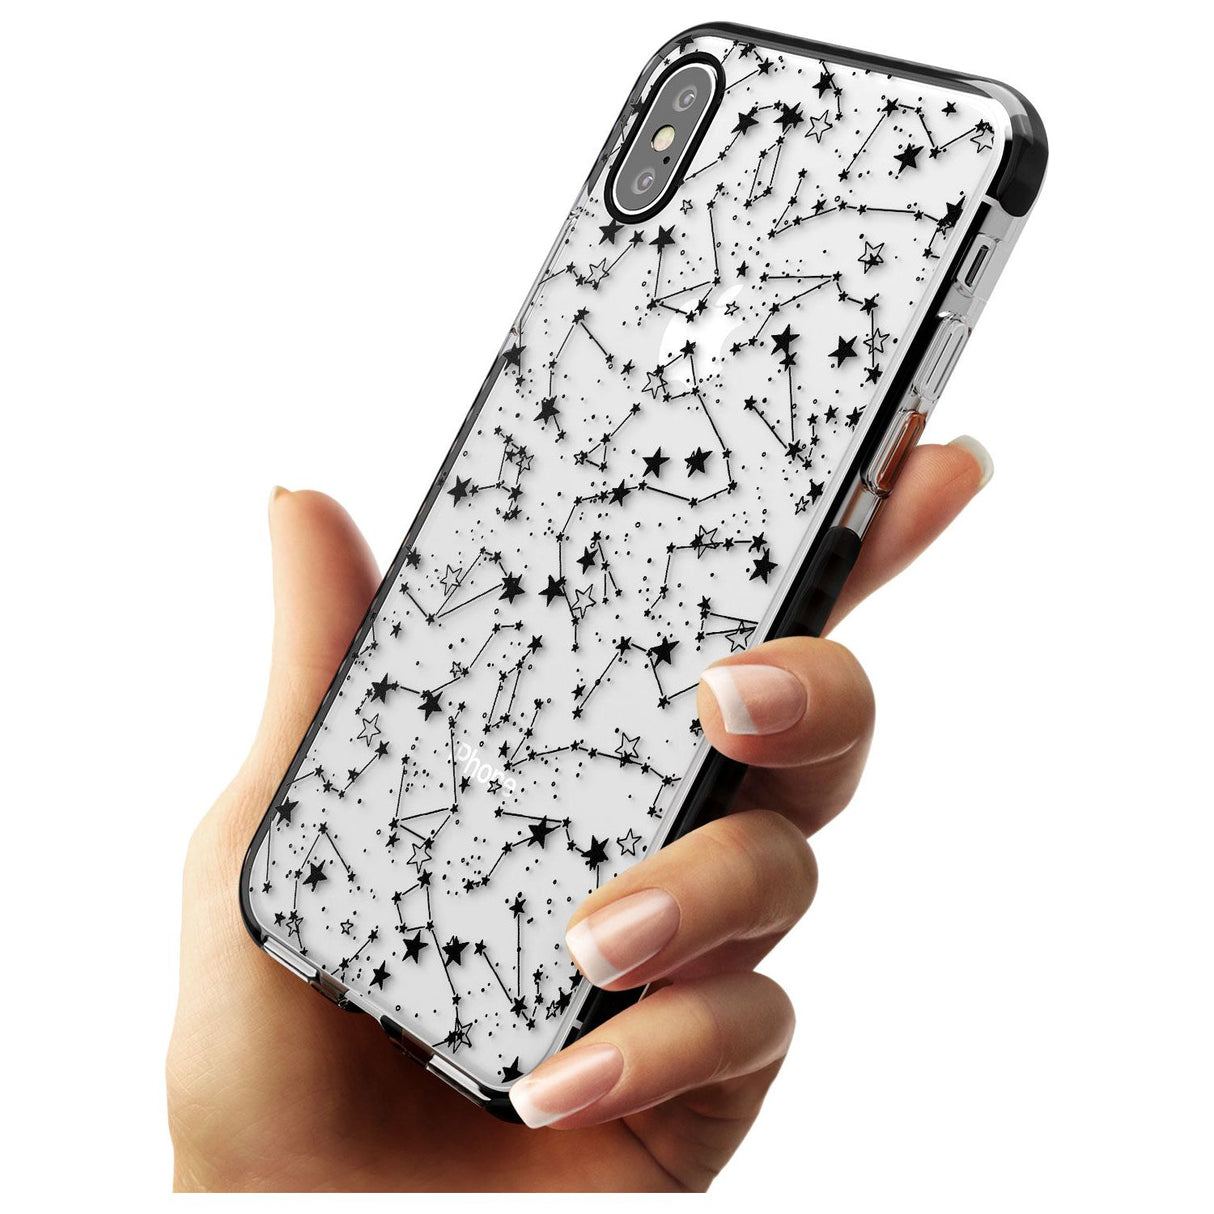 Constellations Black Impact Phone Case for iPhone X XS Max XR